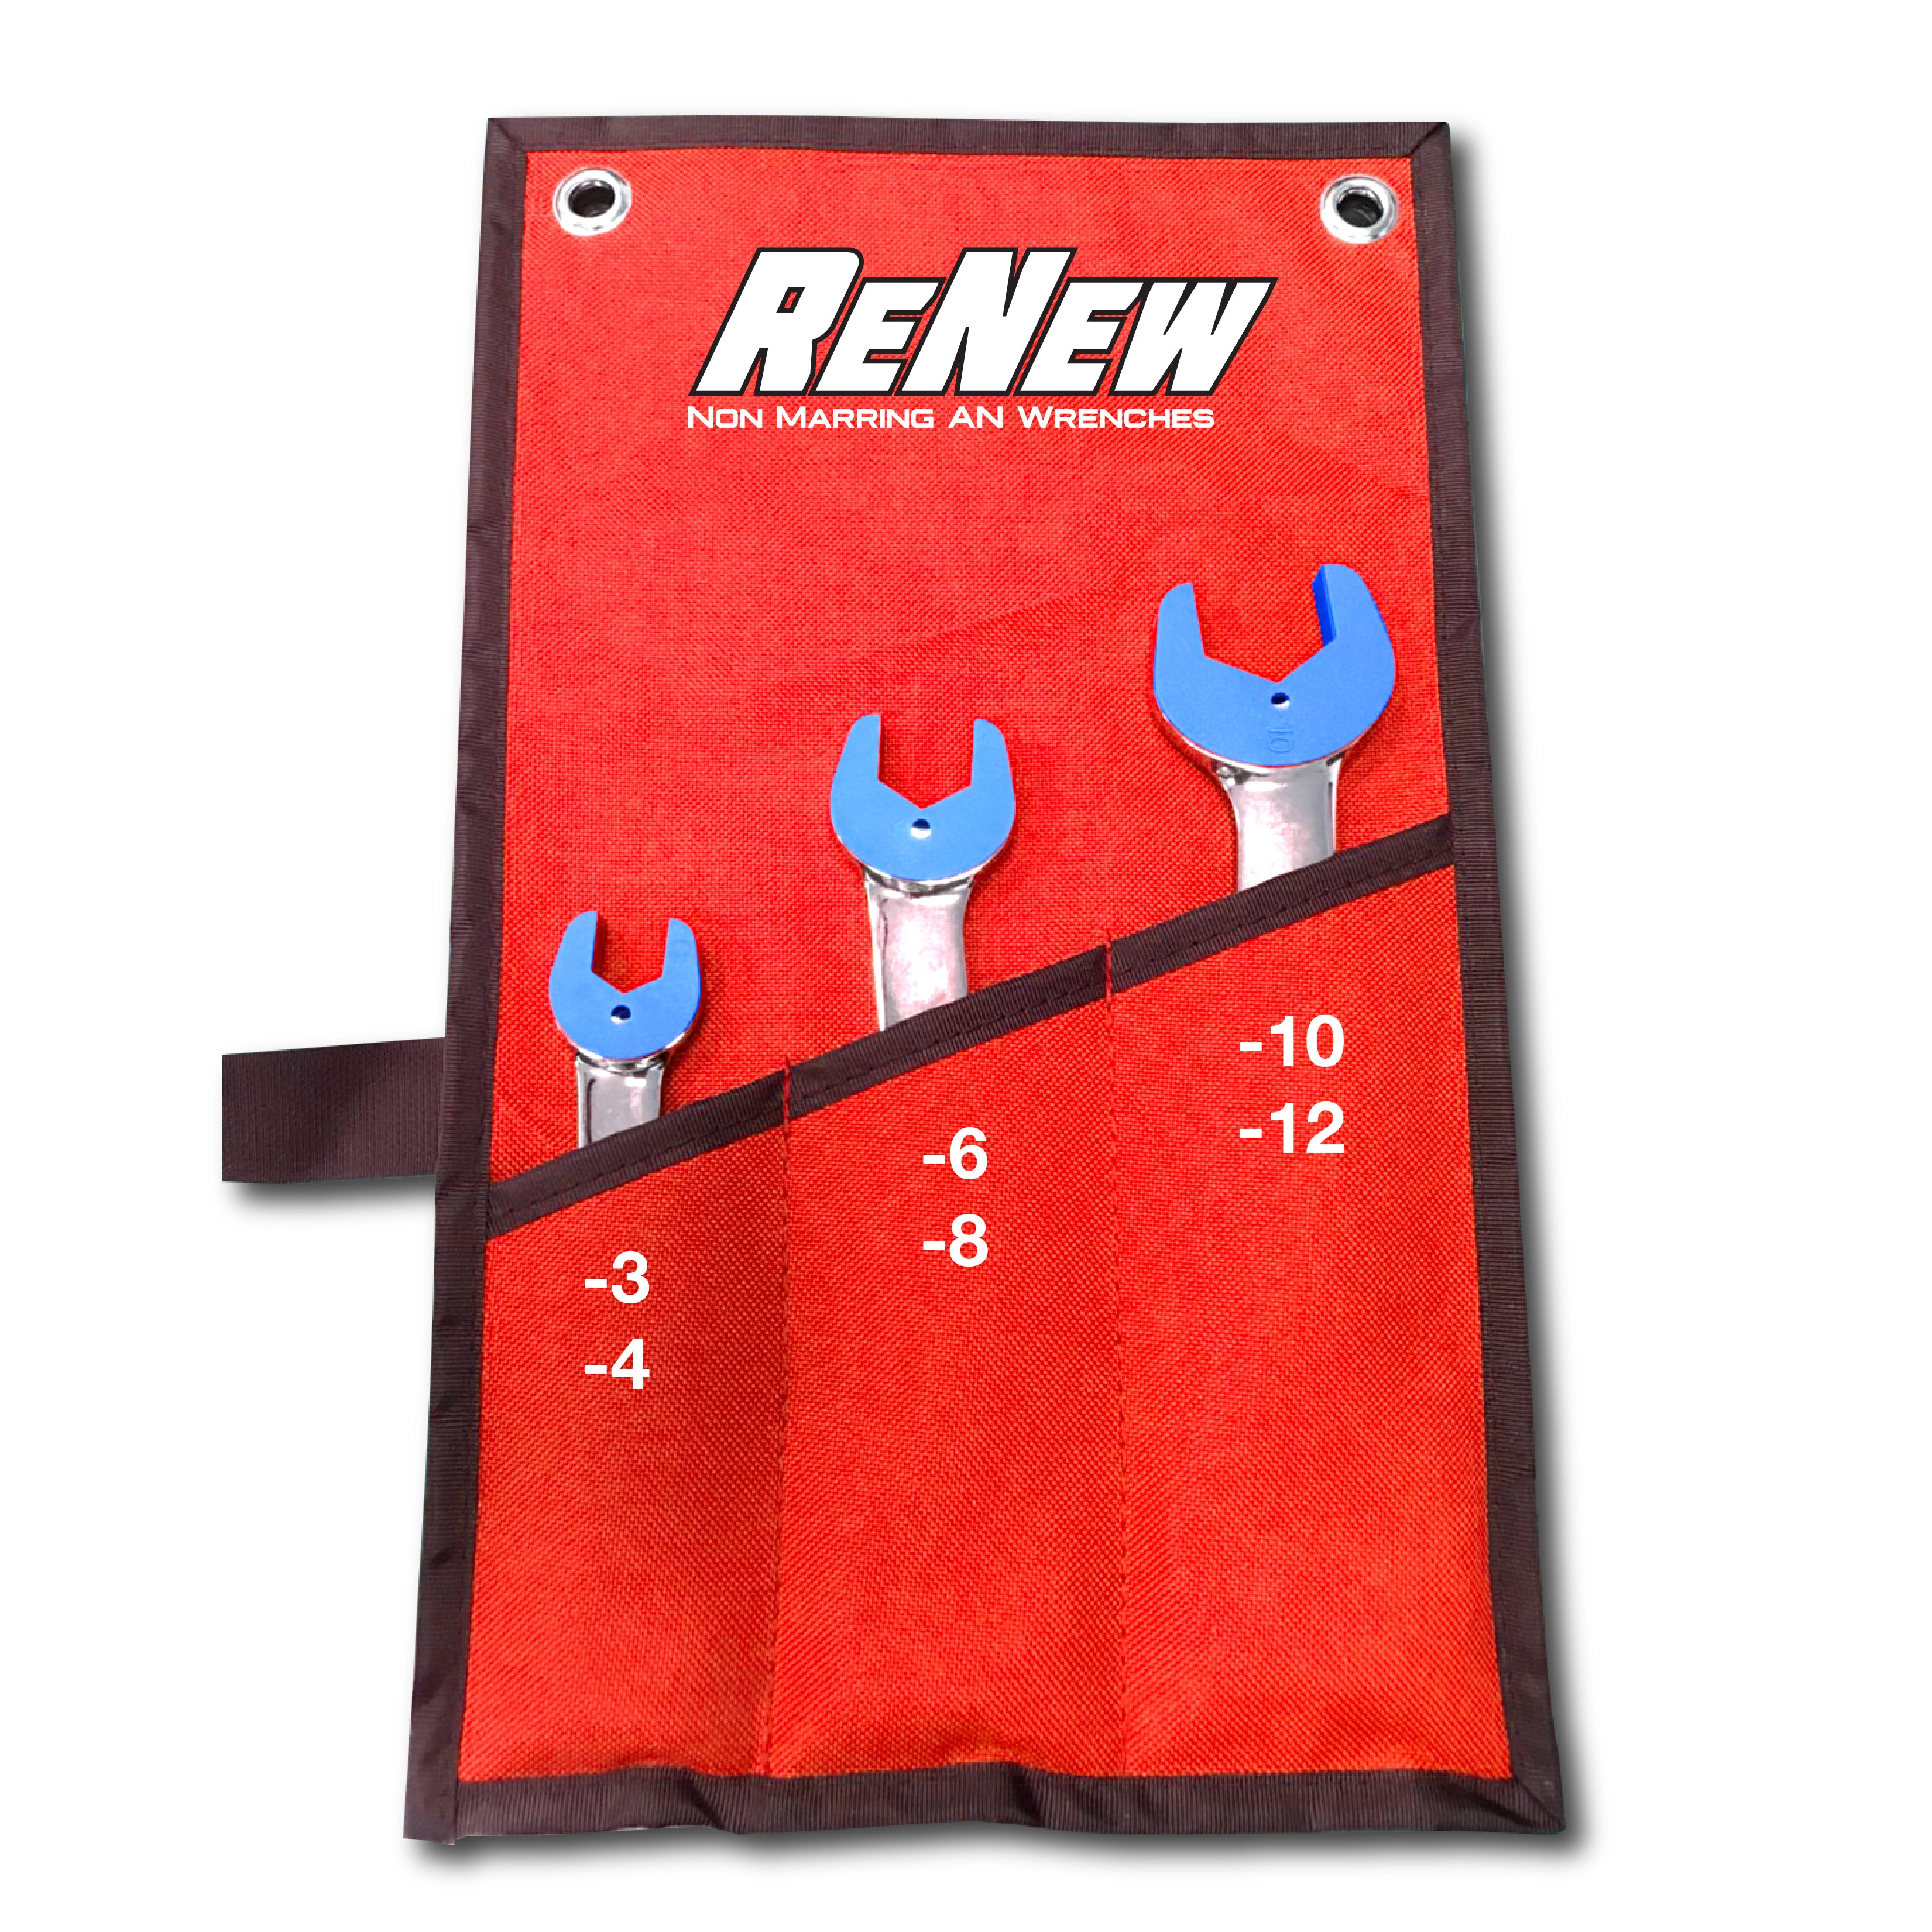 ReNew Non Marring An Wrenches for Aluminum AN Hose Fittings (-3 AN to -12 AN)